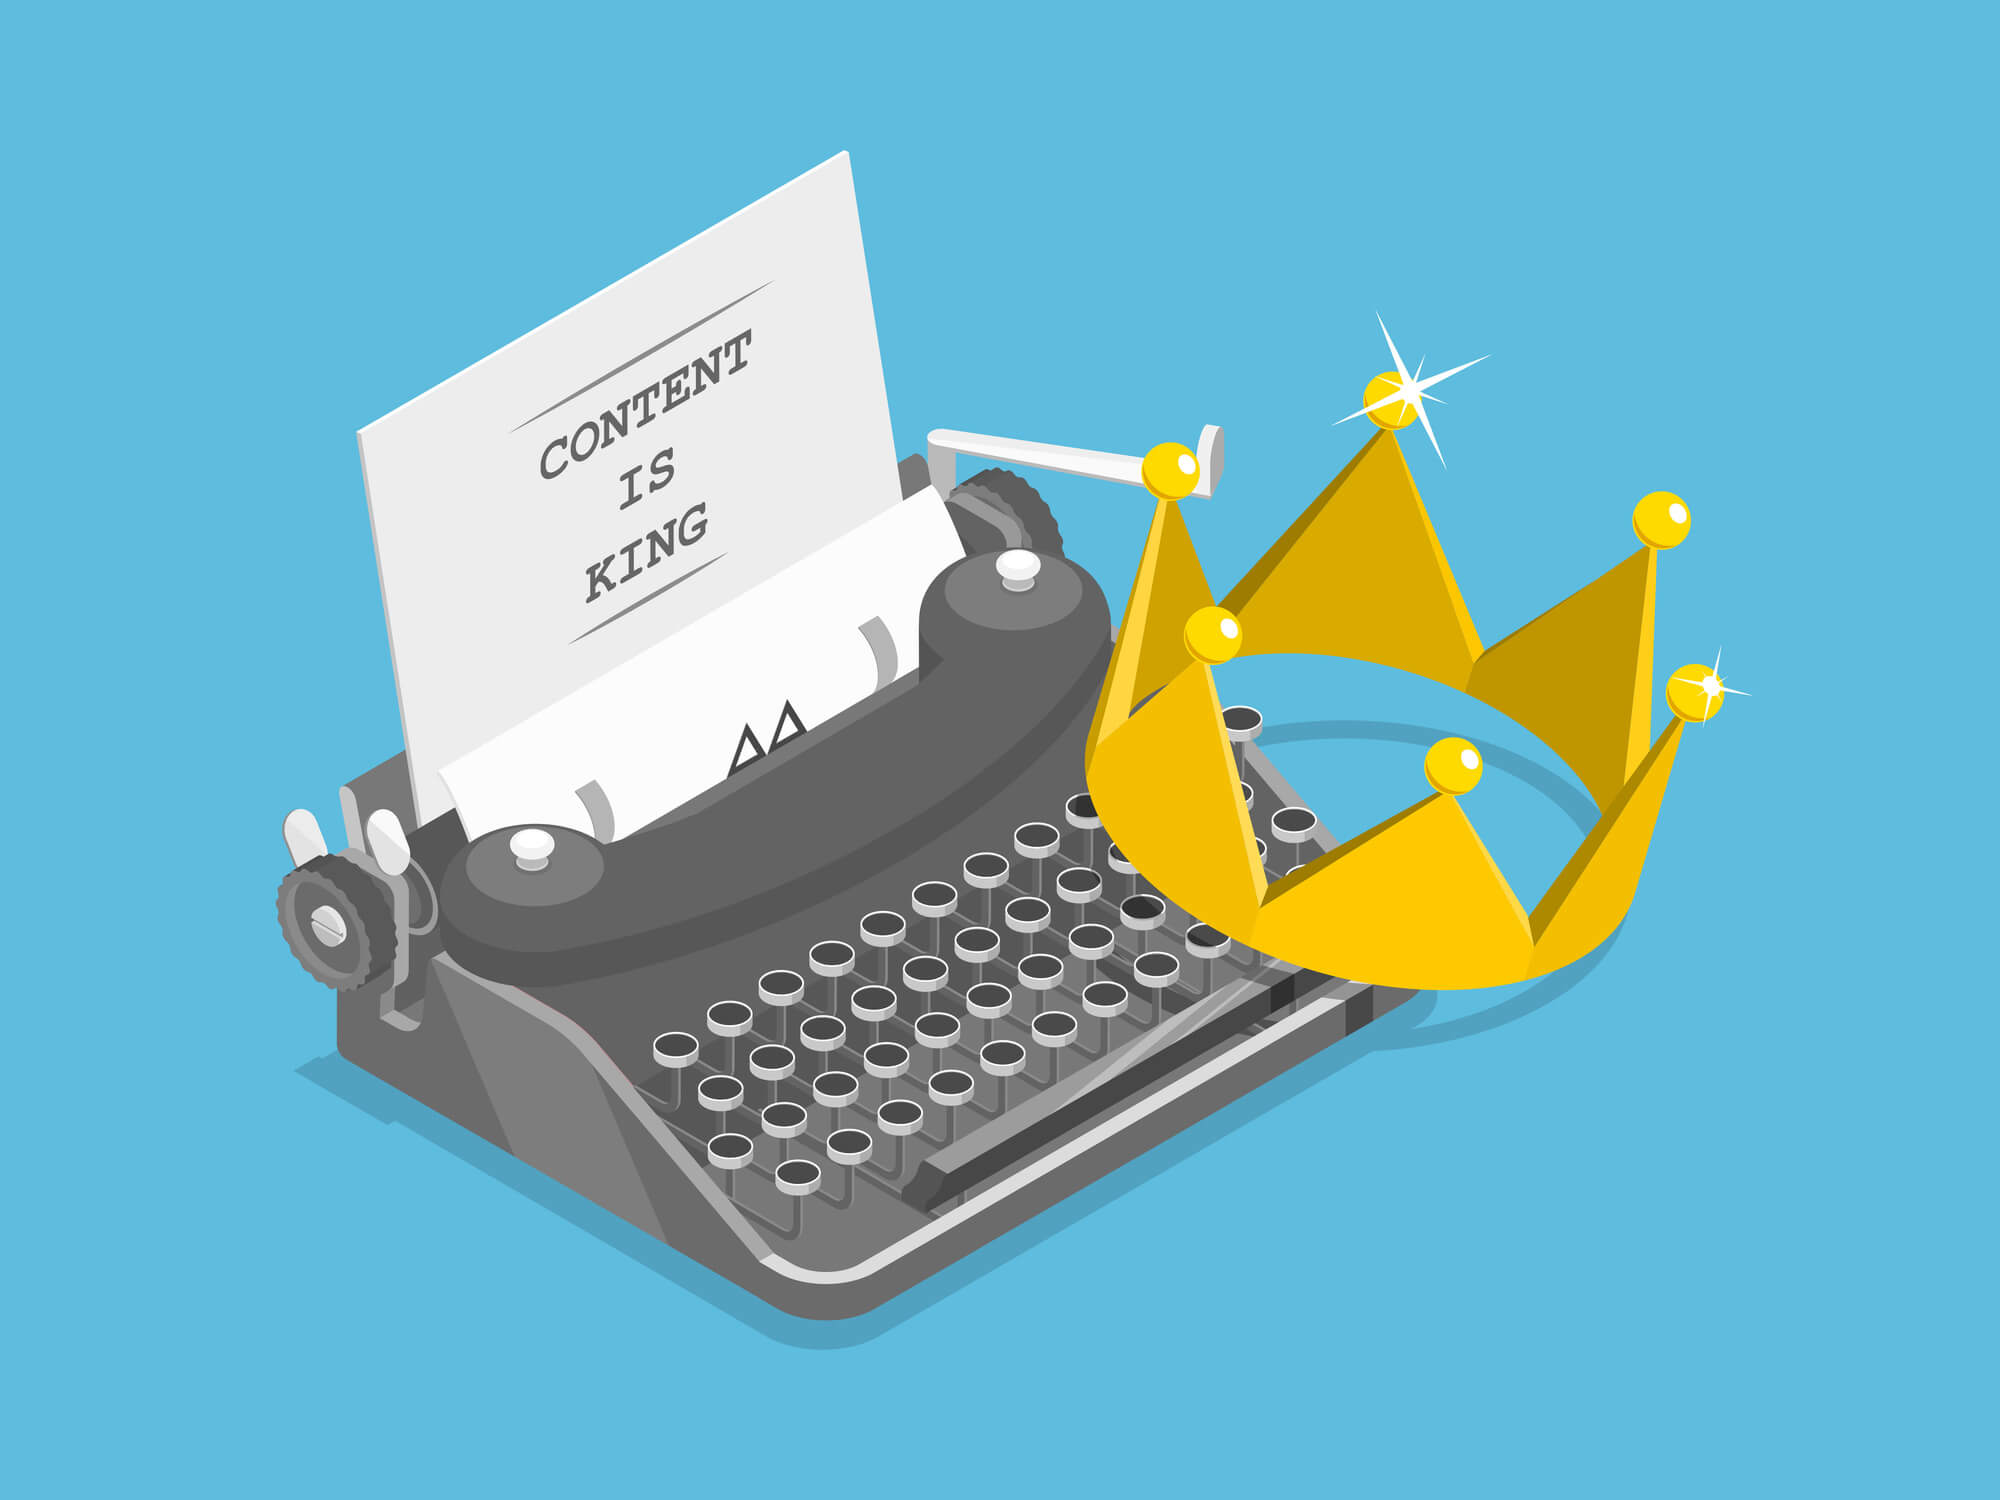 Content King in Digital Marketing - Complete Controller